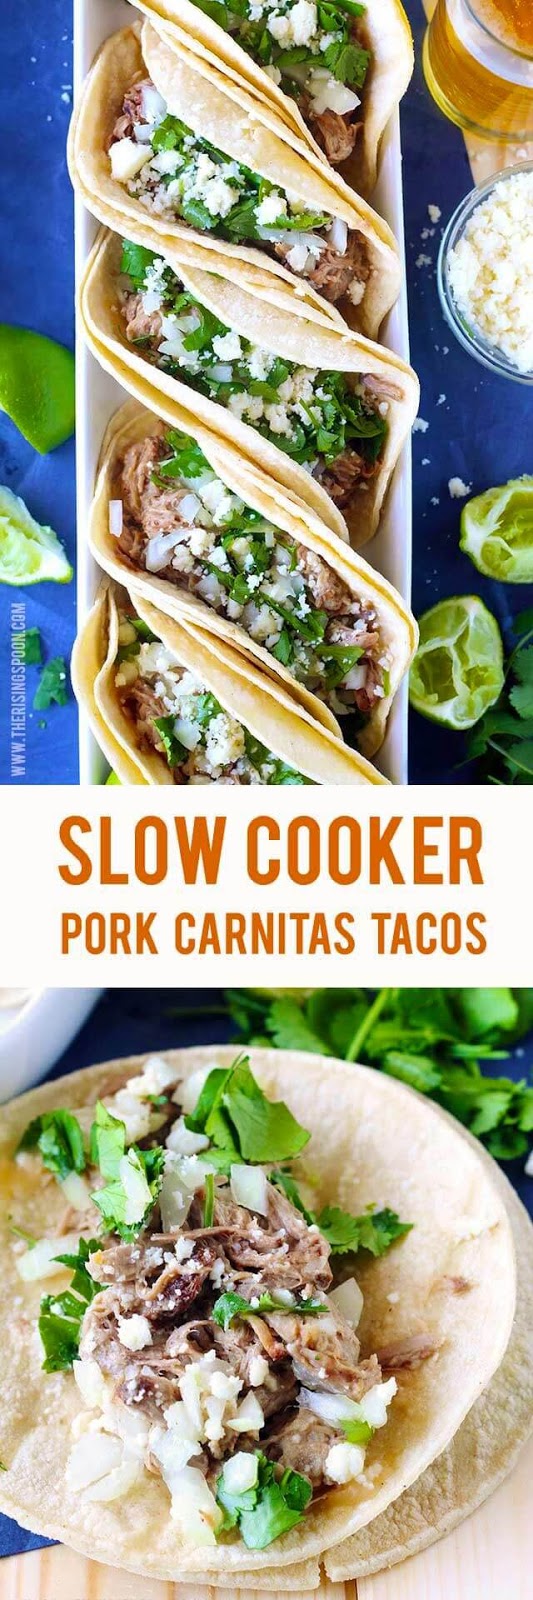 Imagine soft corn tortillas filled with tender, slightly crispy, and juicy shredded pork carnitas, chopped onion and cilantro, crumbled Mexican cheese, and a squeeze of fresh lime juice. Are you salivating yet? Carnitas tacos are perfect for a quick weeknight meal or even a large gathering where you need to feed a crowd without breaking the bank. Make some today and your belly will thank you.